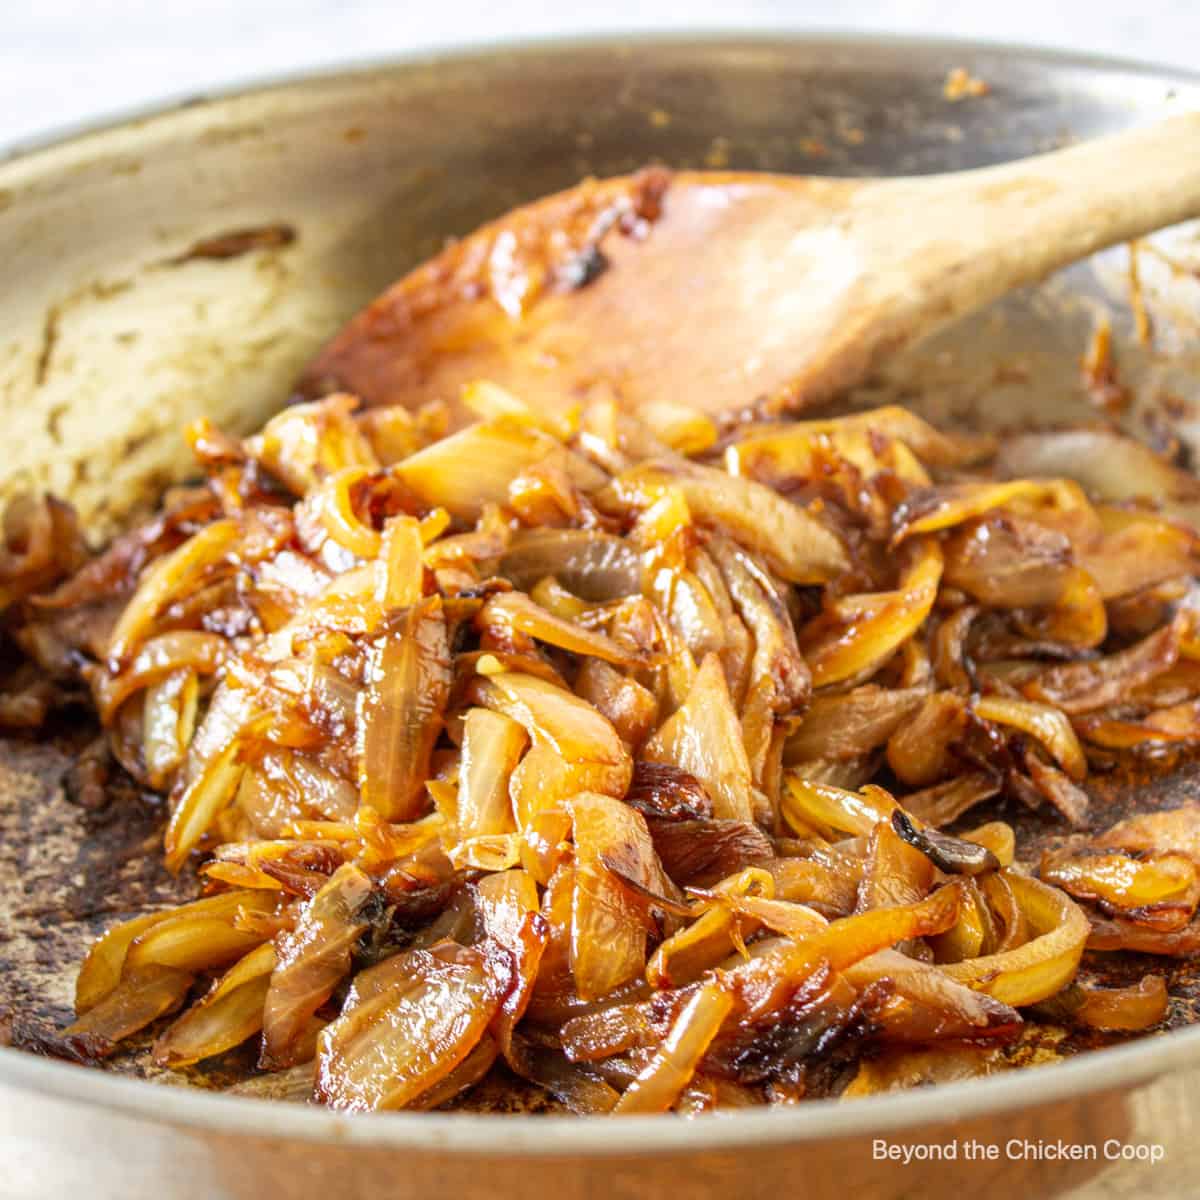 Caramelized onions in a fry pan with a wooden spoon.